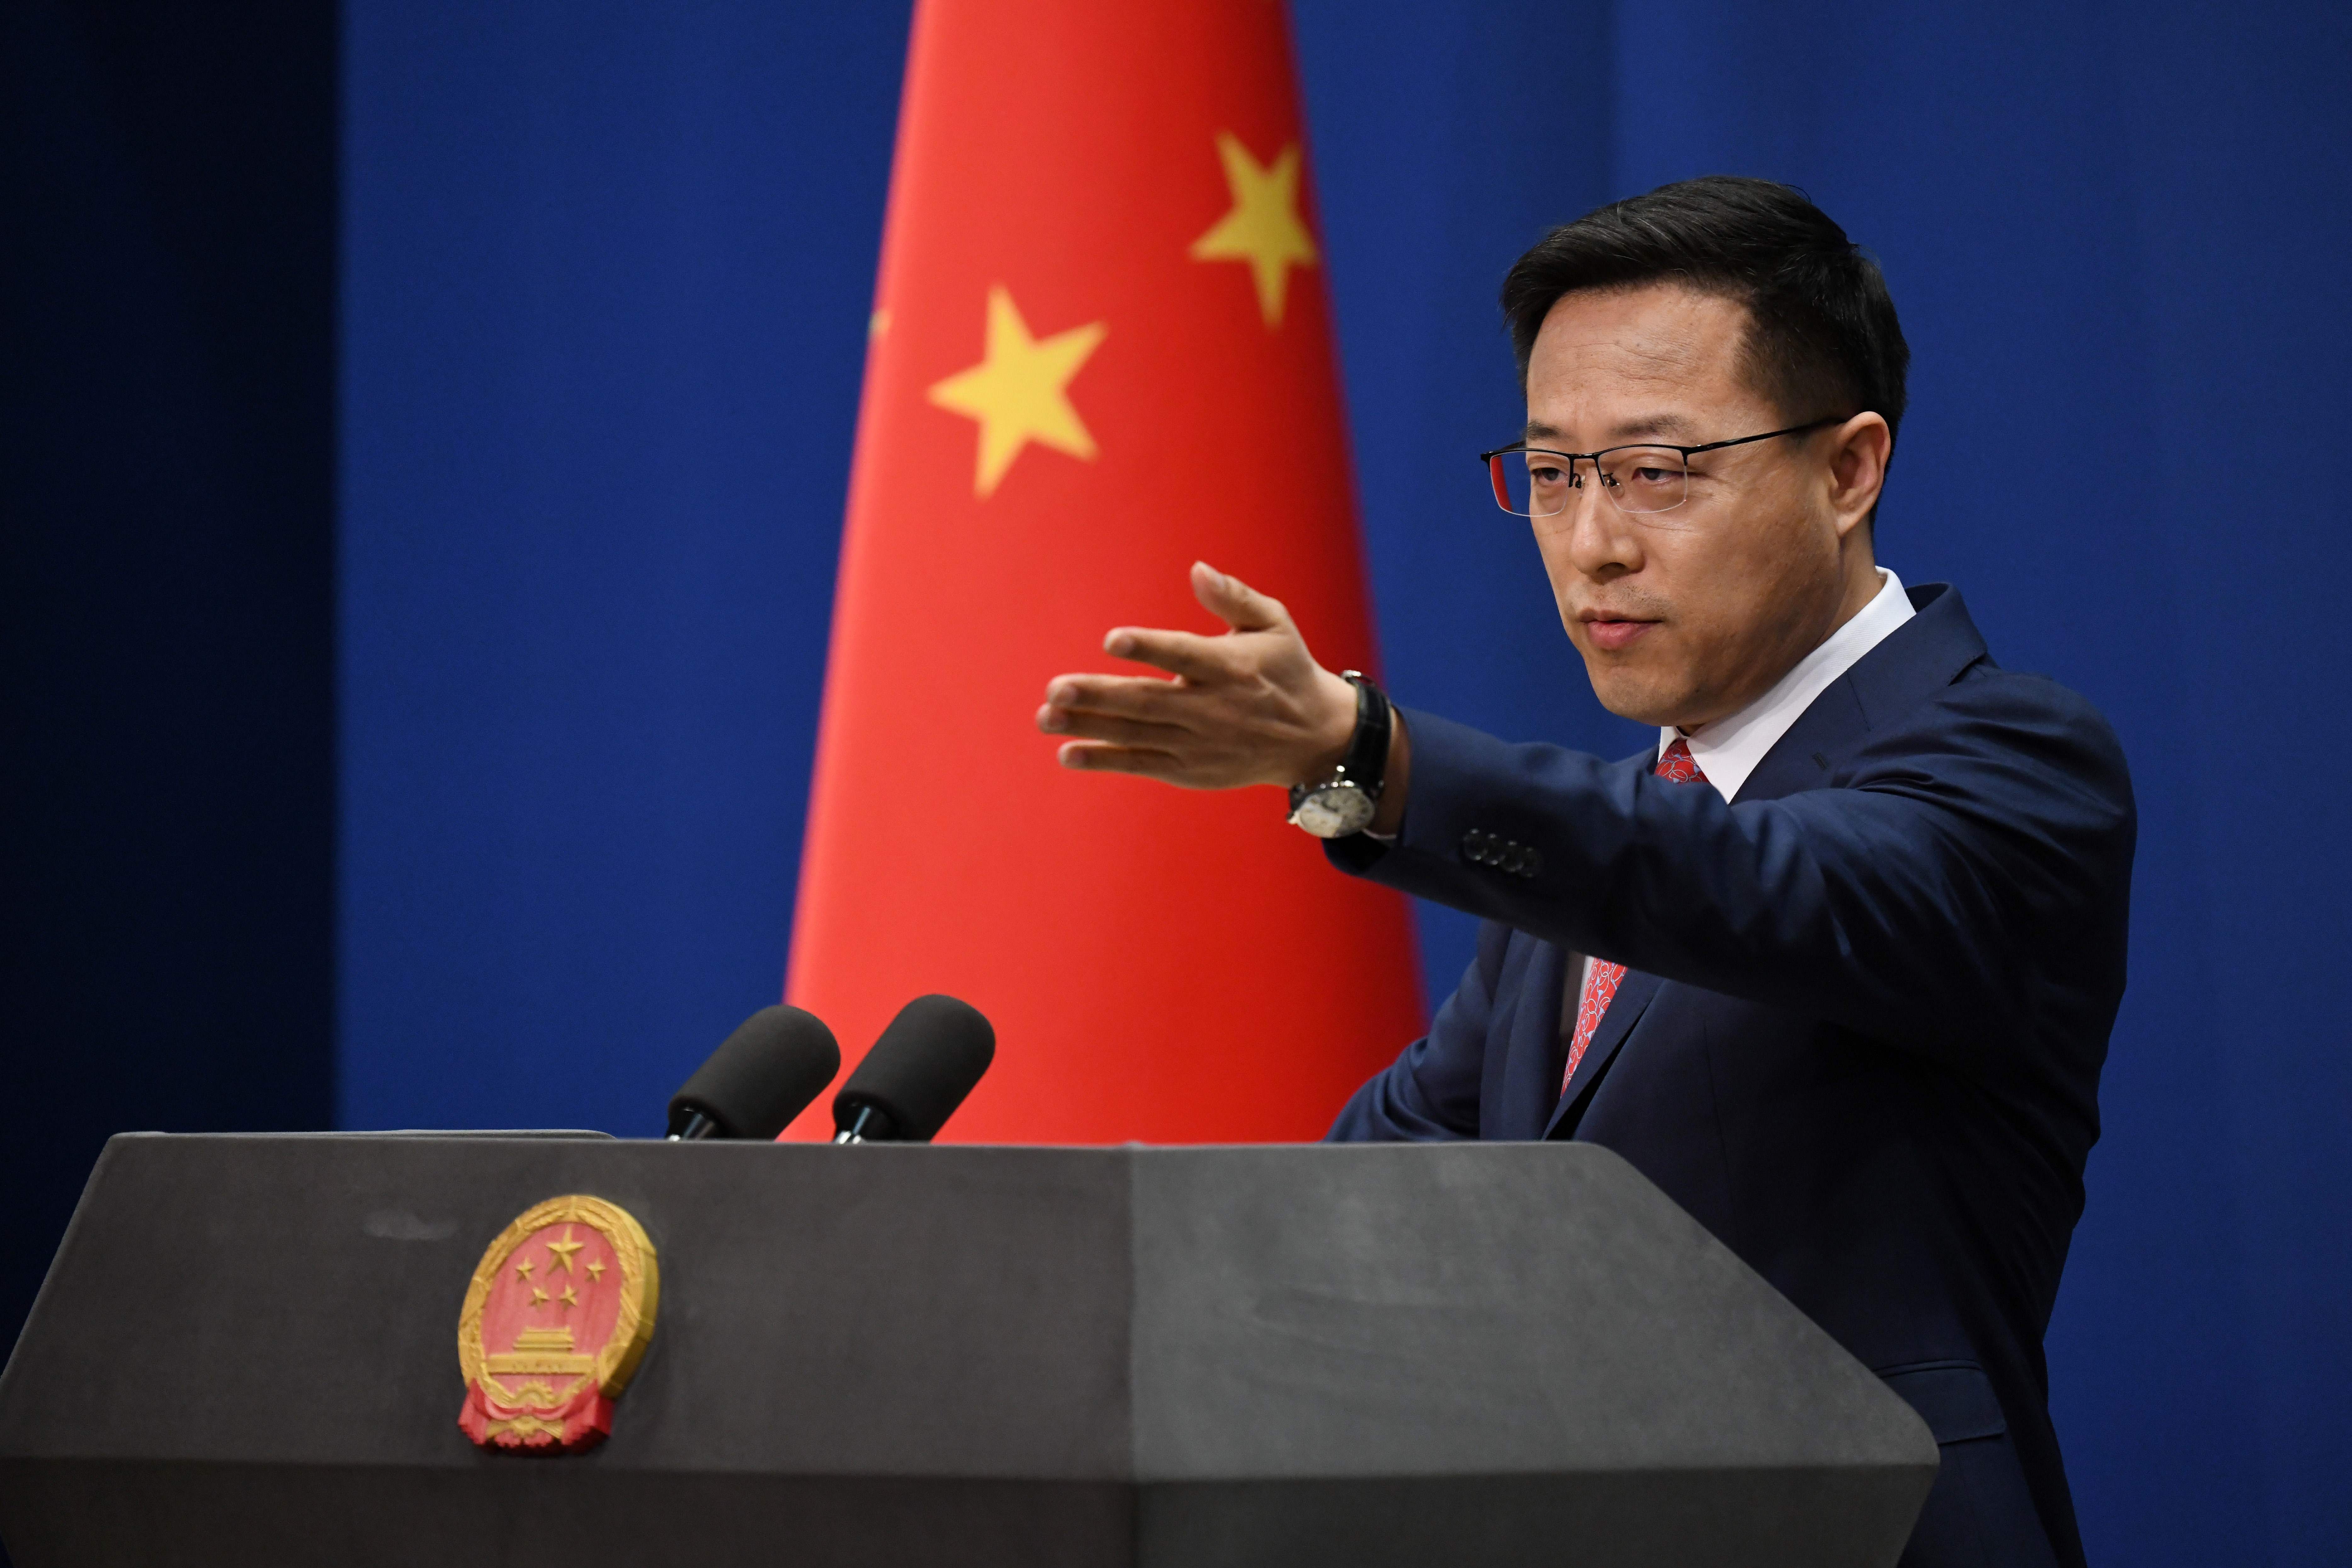 Chinese Foreign Ministry spokesman Zhao Lijian takes a question at the daily media briefing in Beijing on April 8, 2020. (GREG BAKER/AFP via Getty Images)